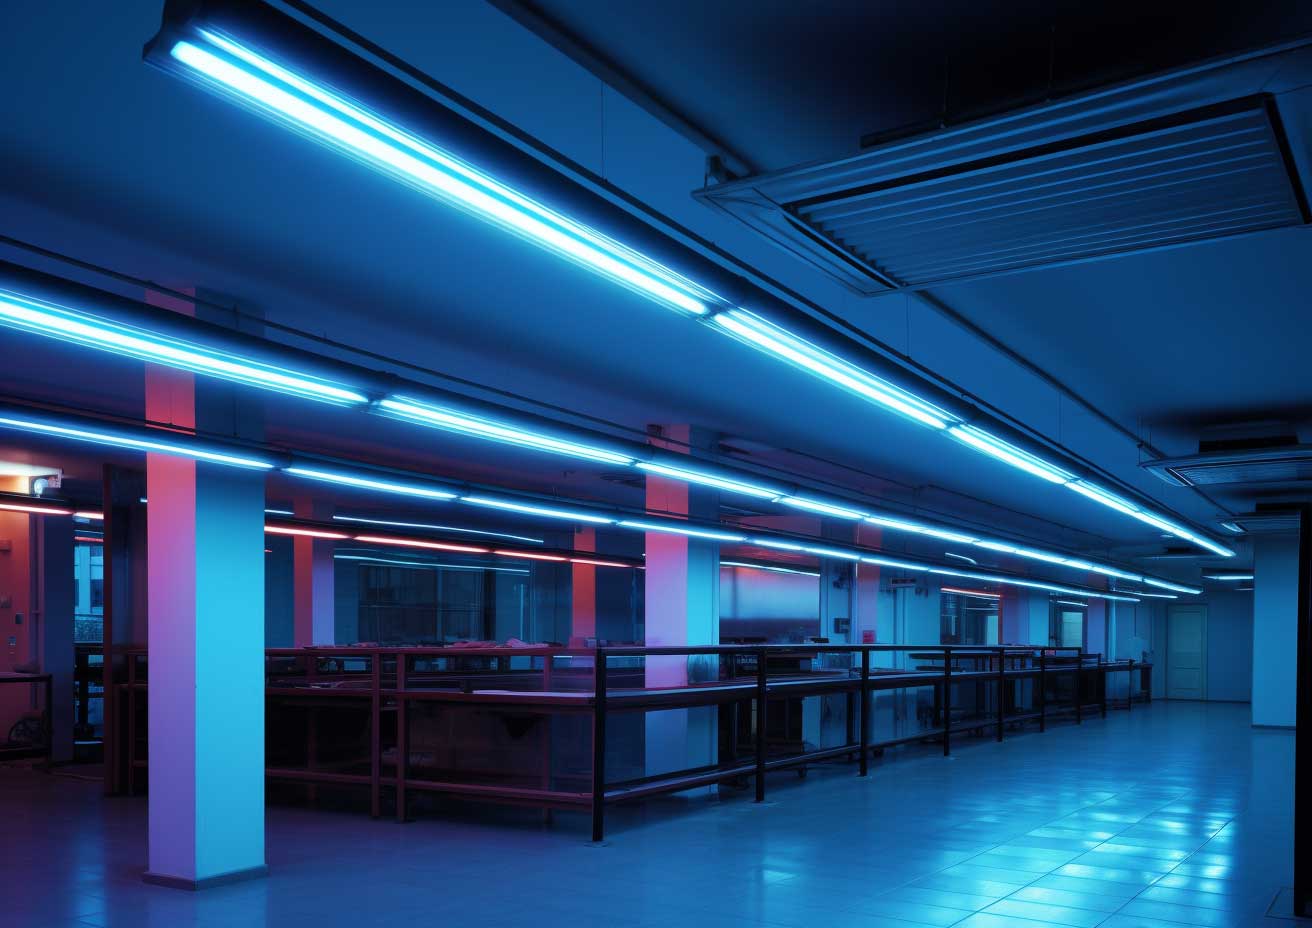 A long hallway with fluorescent lights, while considering the advantages of LED lighting.